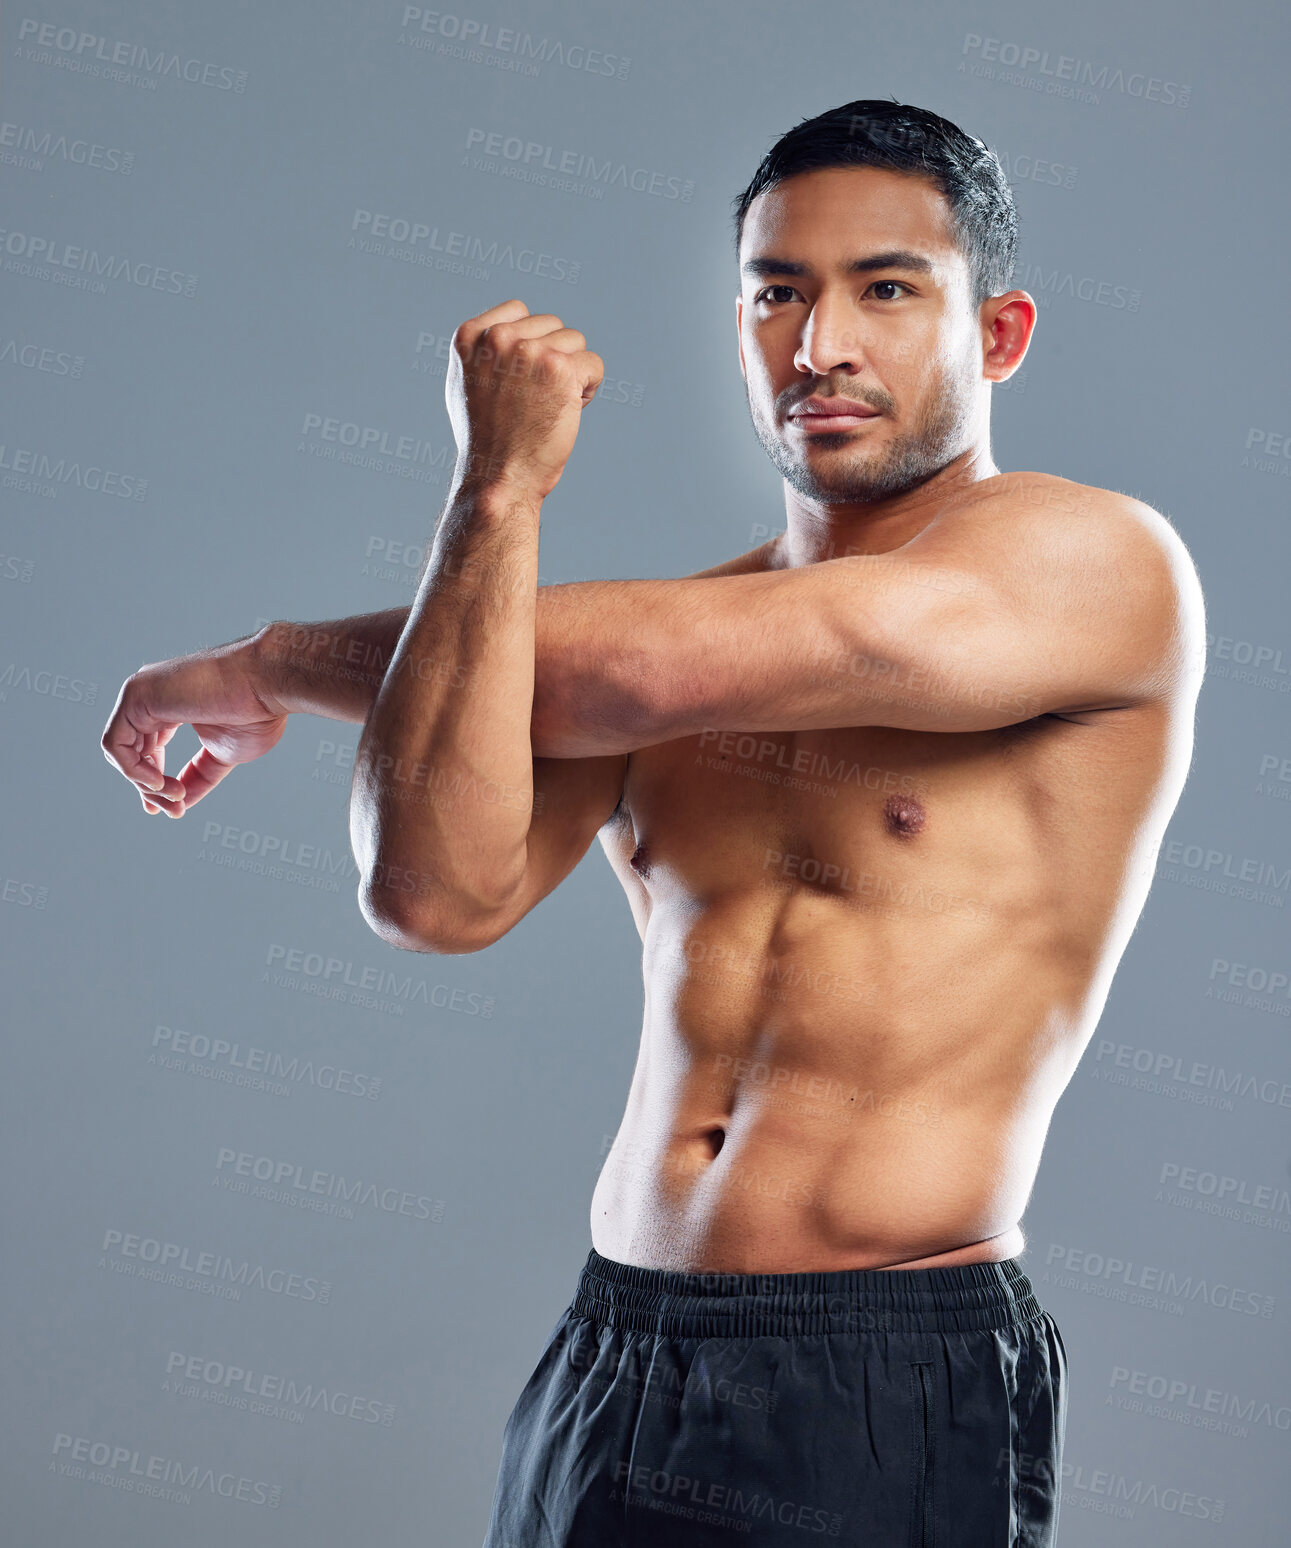 Buy stock photo Studio shot of a muscular young man stretching his arms against a grey background